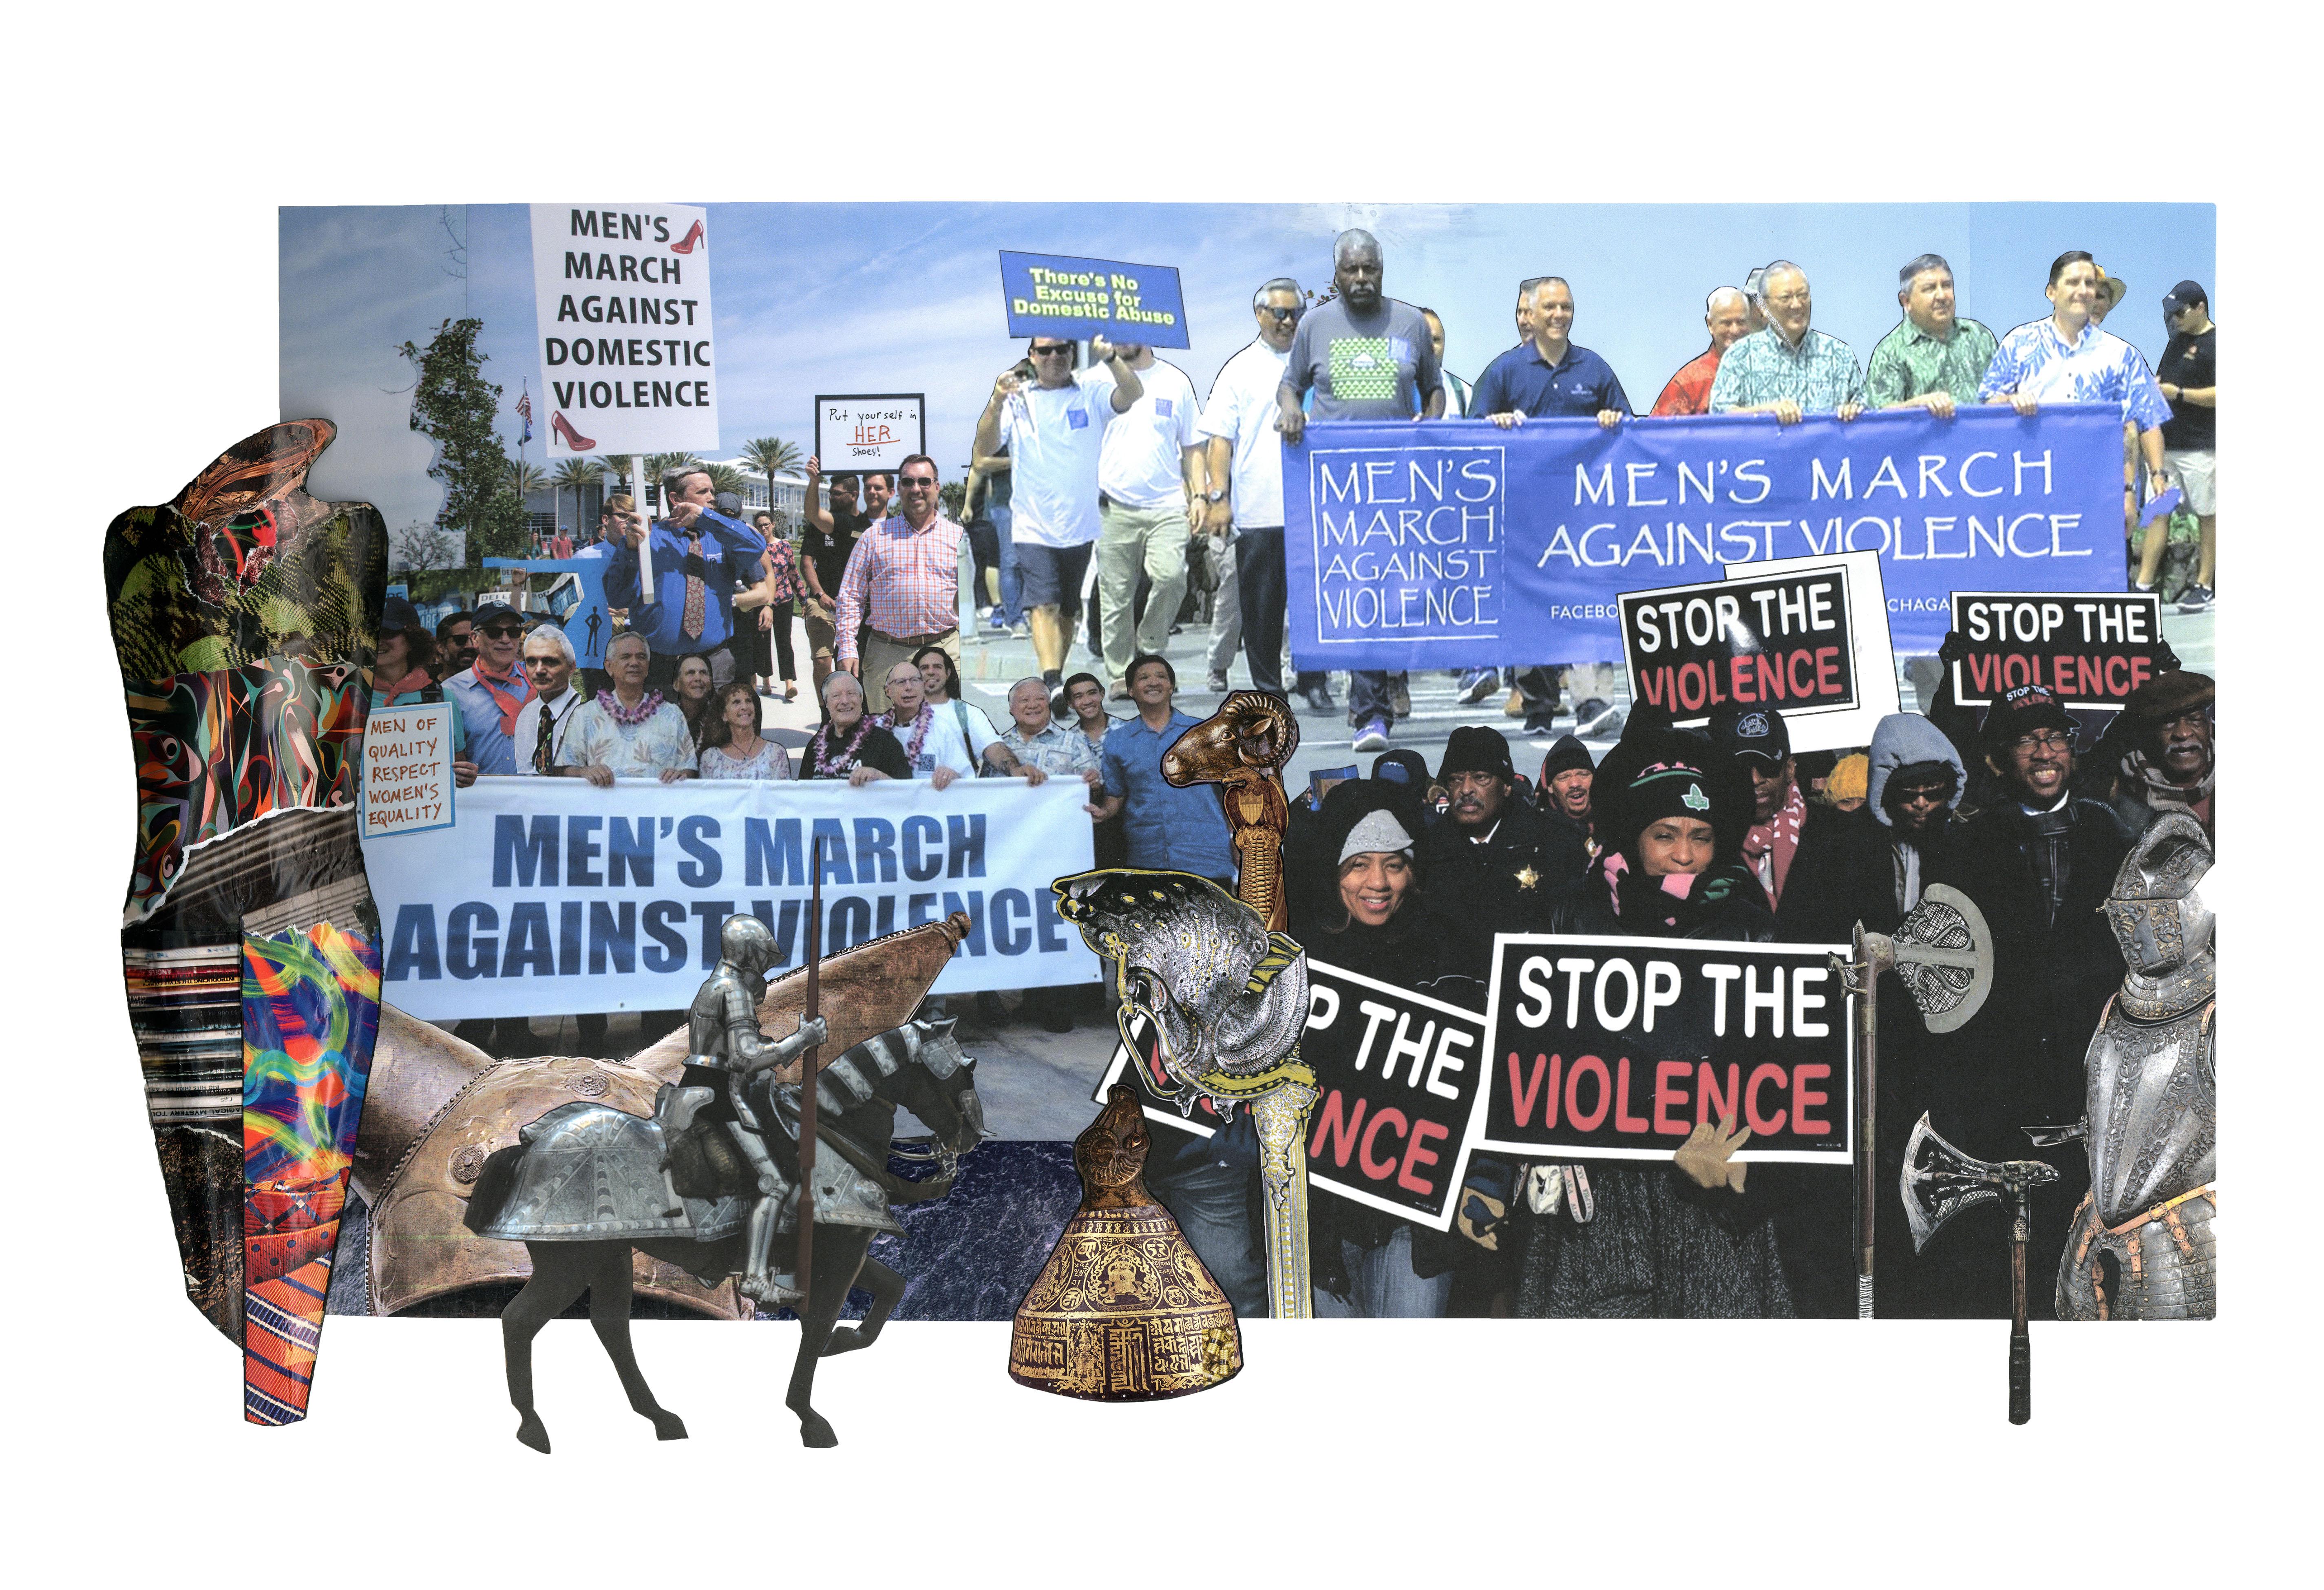 Linda Stein Figurative Print - Men’s March Against Violence 1079 - Signed, Limited Edition Contemporary Print